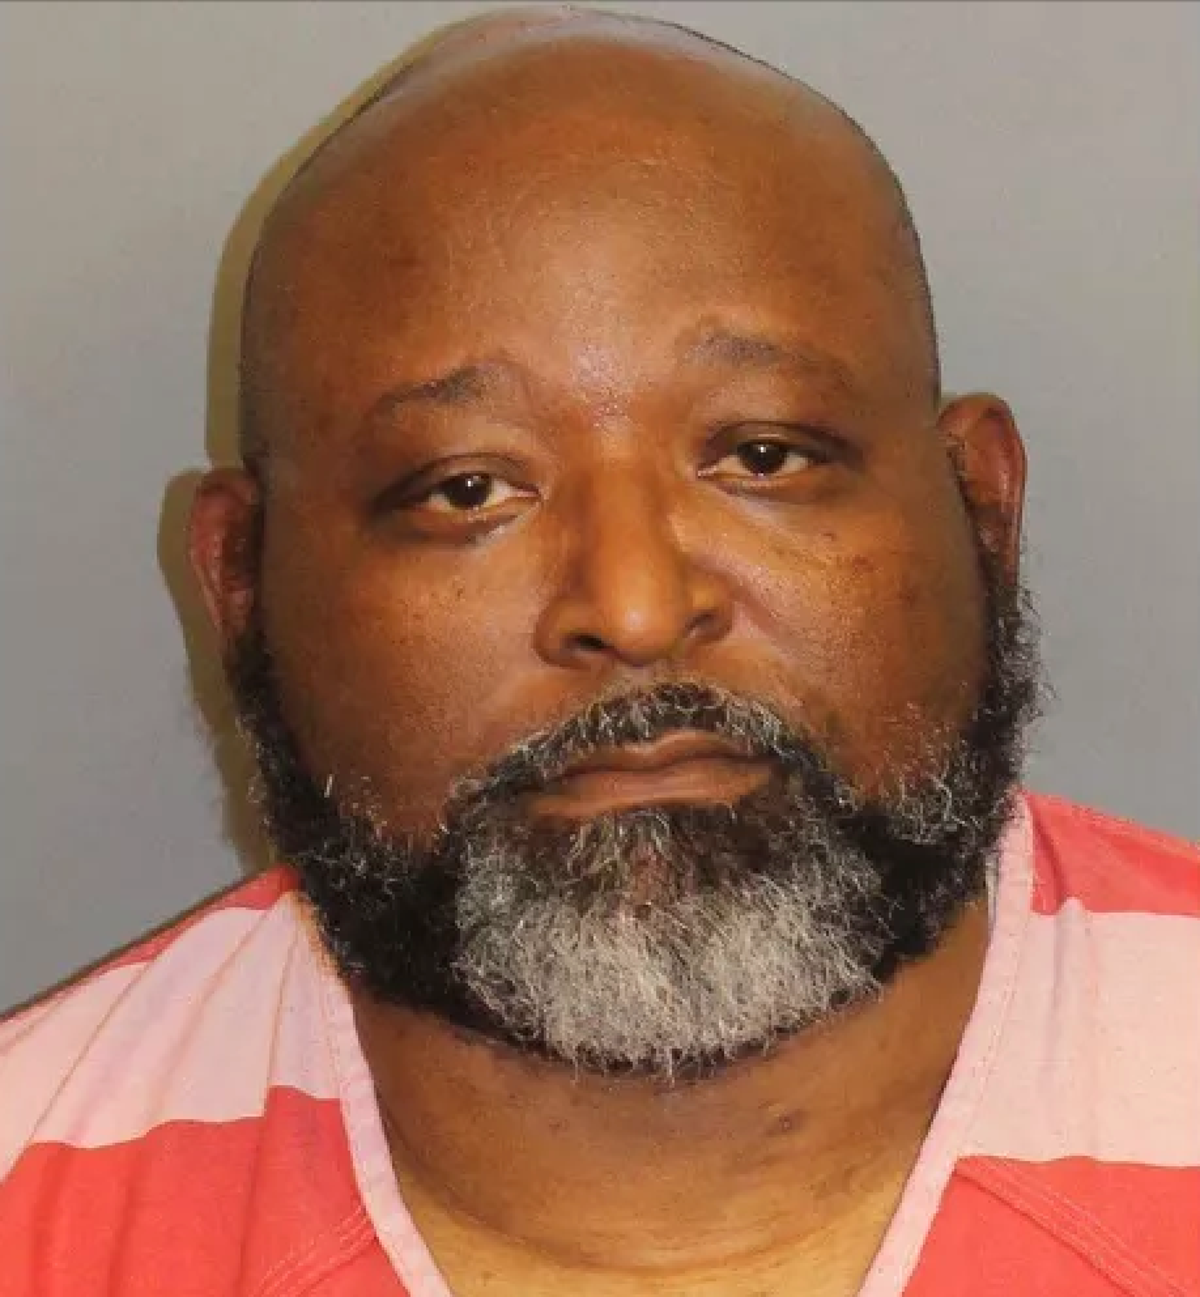 Middle school assistant principal arrested in connection to cold case in Georgia [Video]